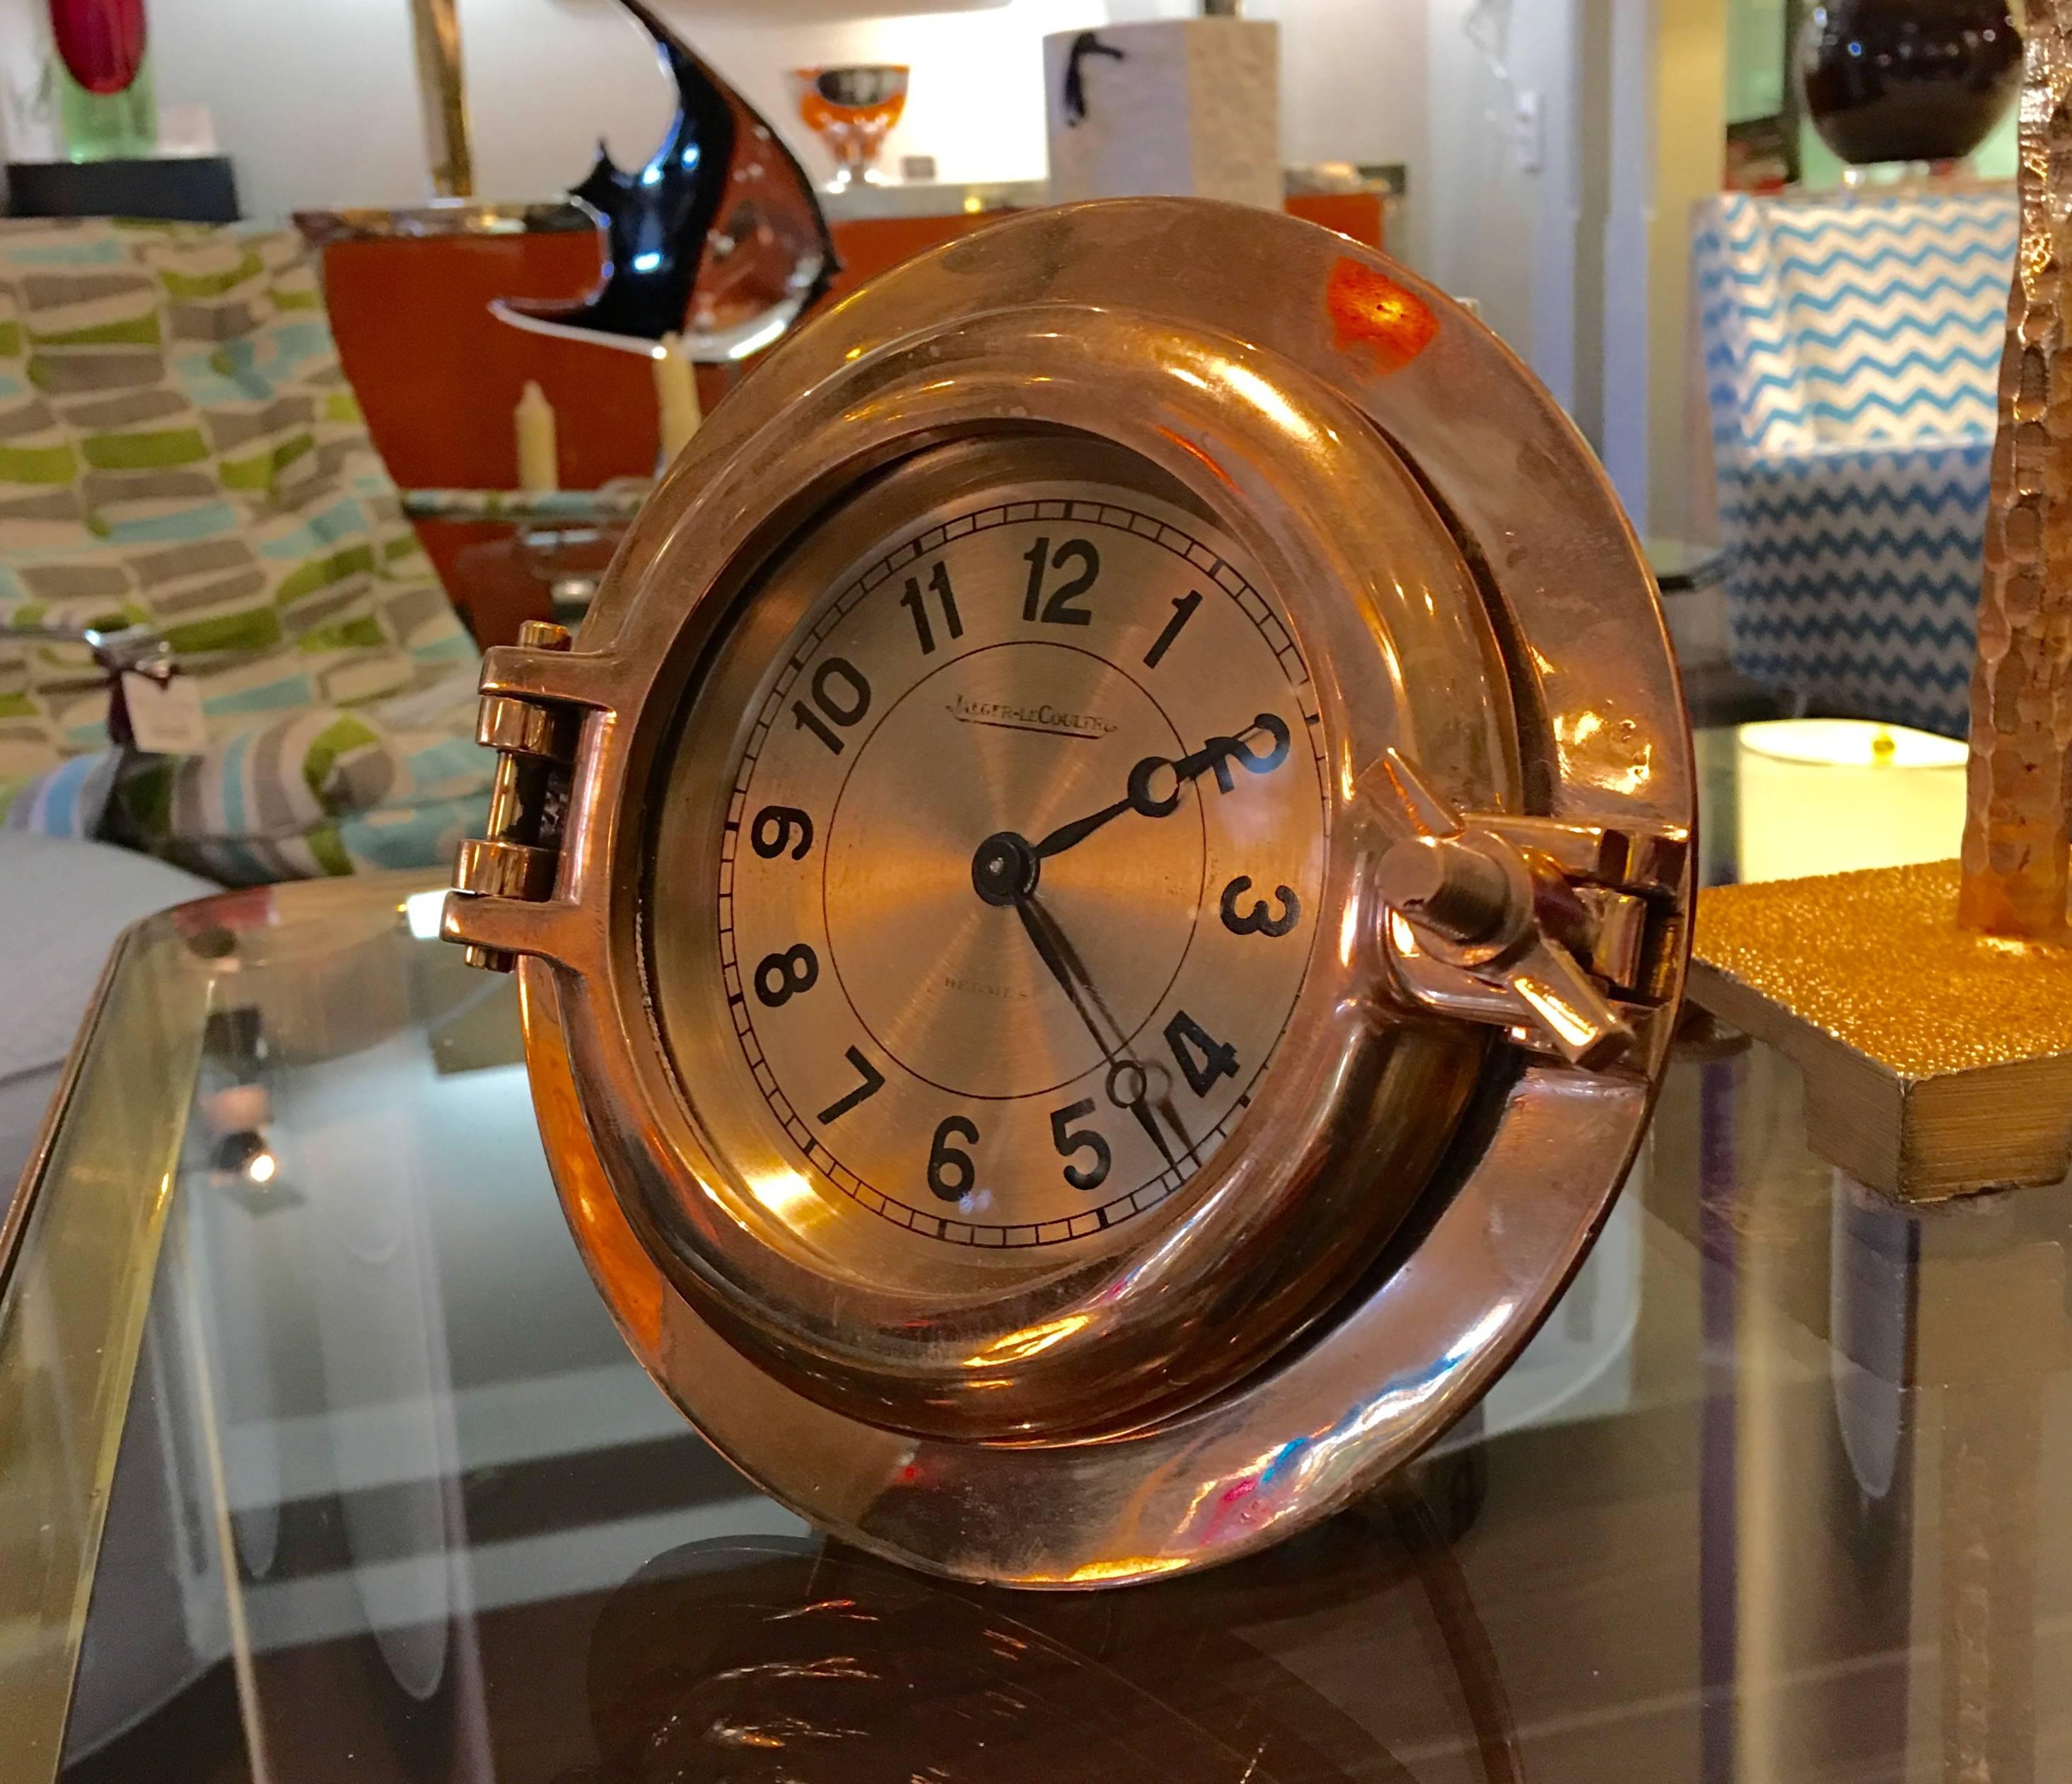 Rare Hermes porthole clock made by Jaeger-LeCoultre. It is really heavy and of great quality.